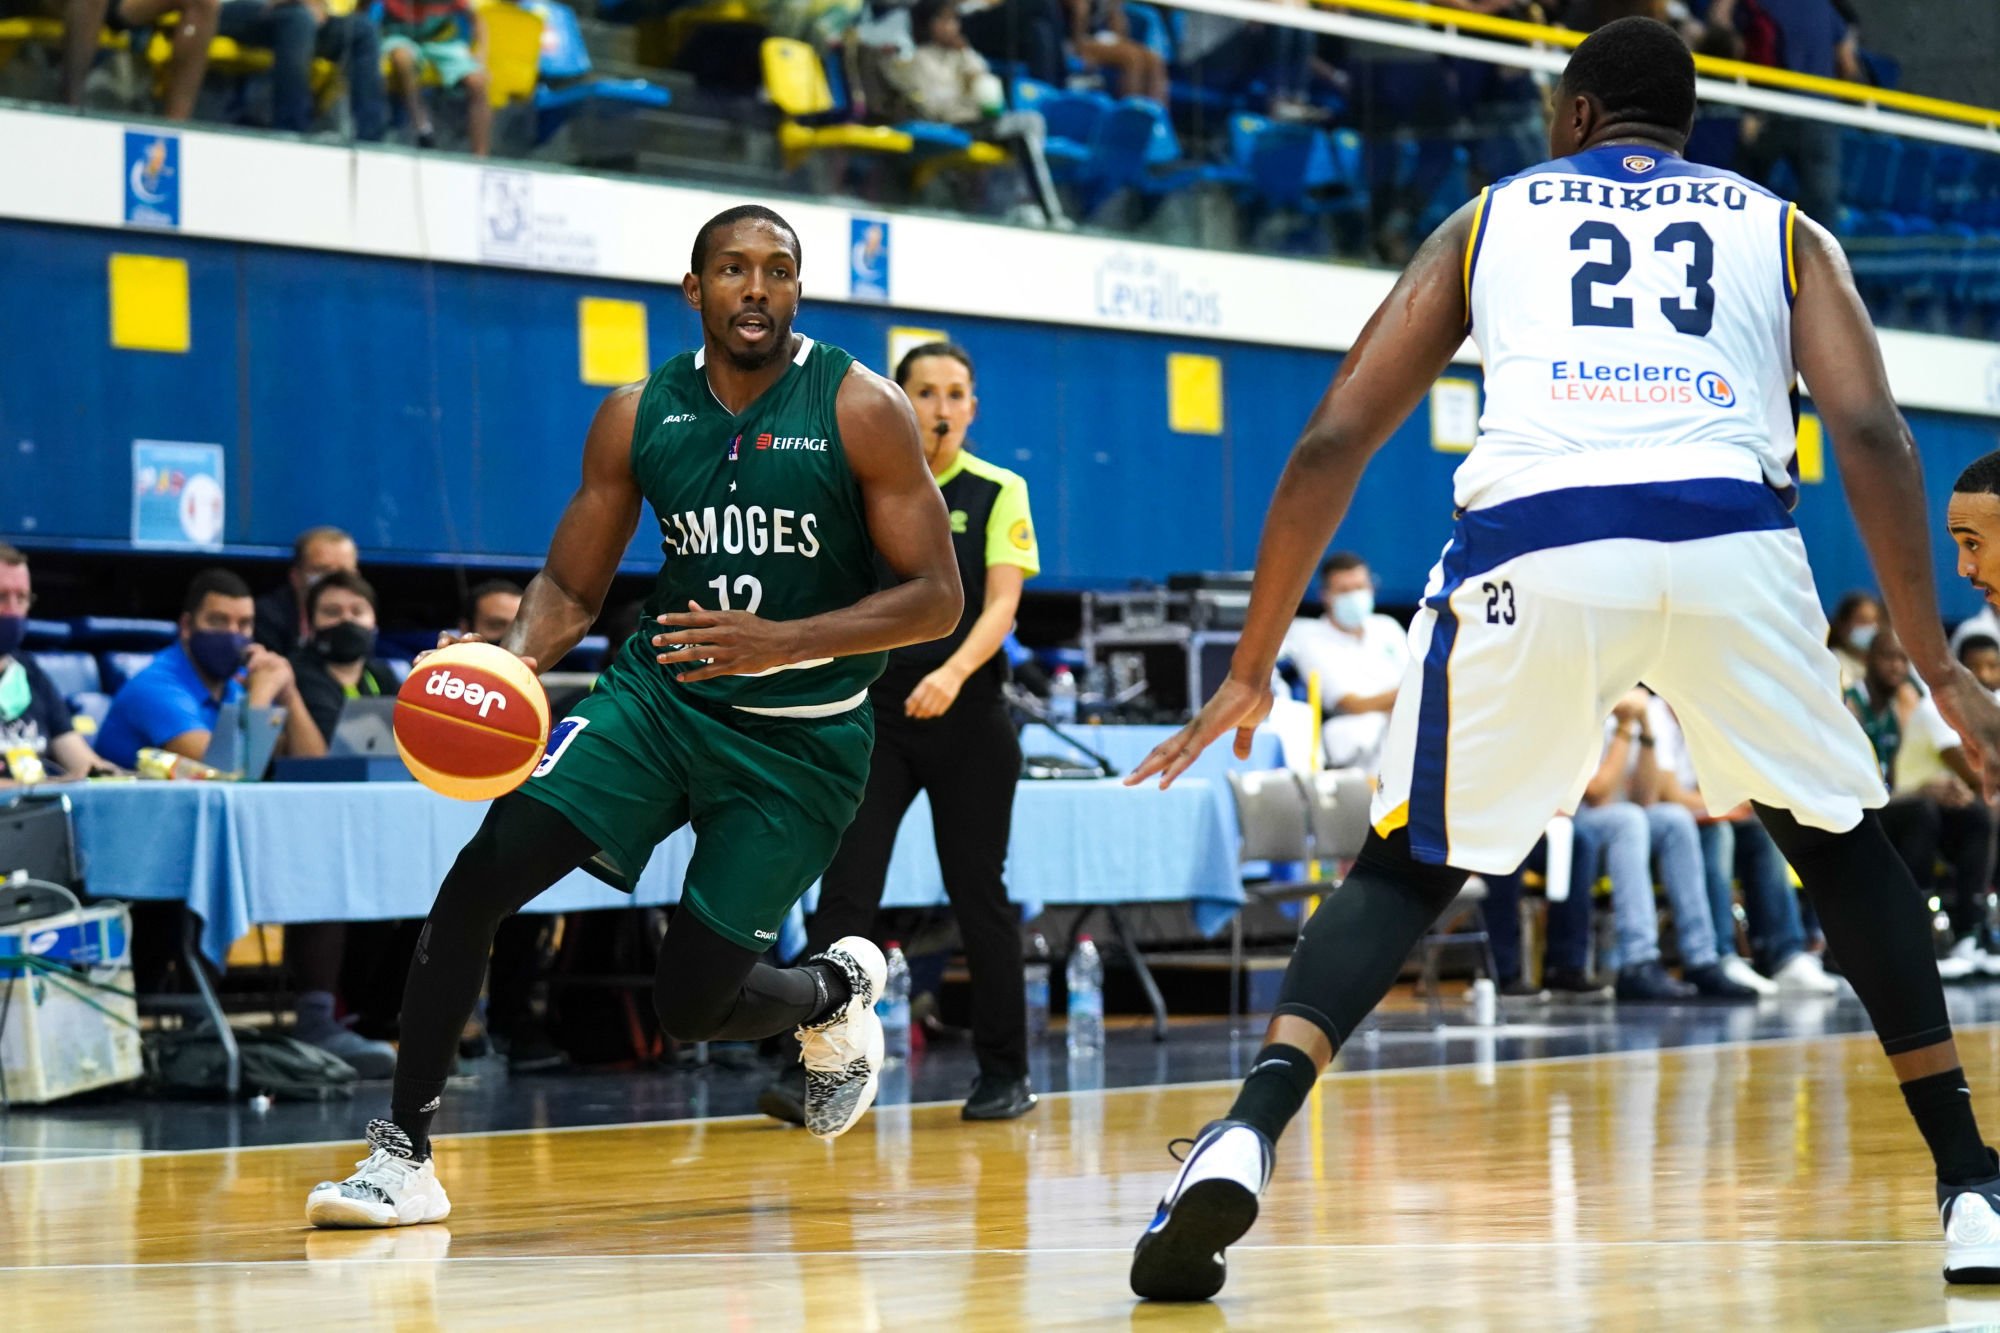 DeMarcus NELSON of Limoges CSP during the Michael Brooks Trophy match between Metropolitans 92 and Limoges on Setpember 12th, 2020 in Levallois-Peret, France. (Photo by Herve Bellenger/Icon Sport) - DeMarcus NELSON - Palais des sports Marcel-Cerdan - Levallois (France)